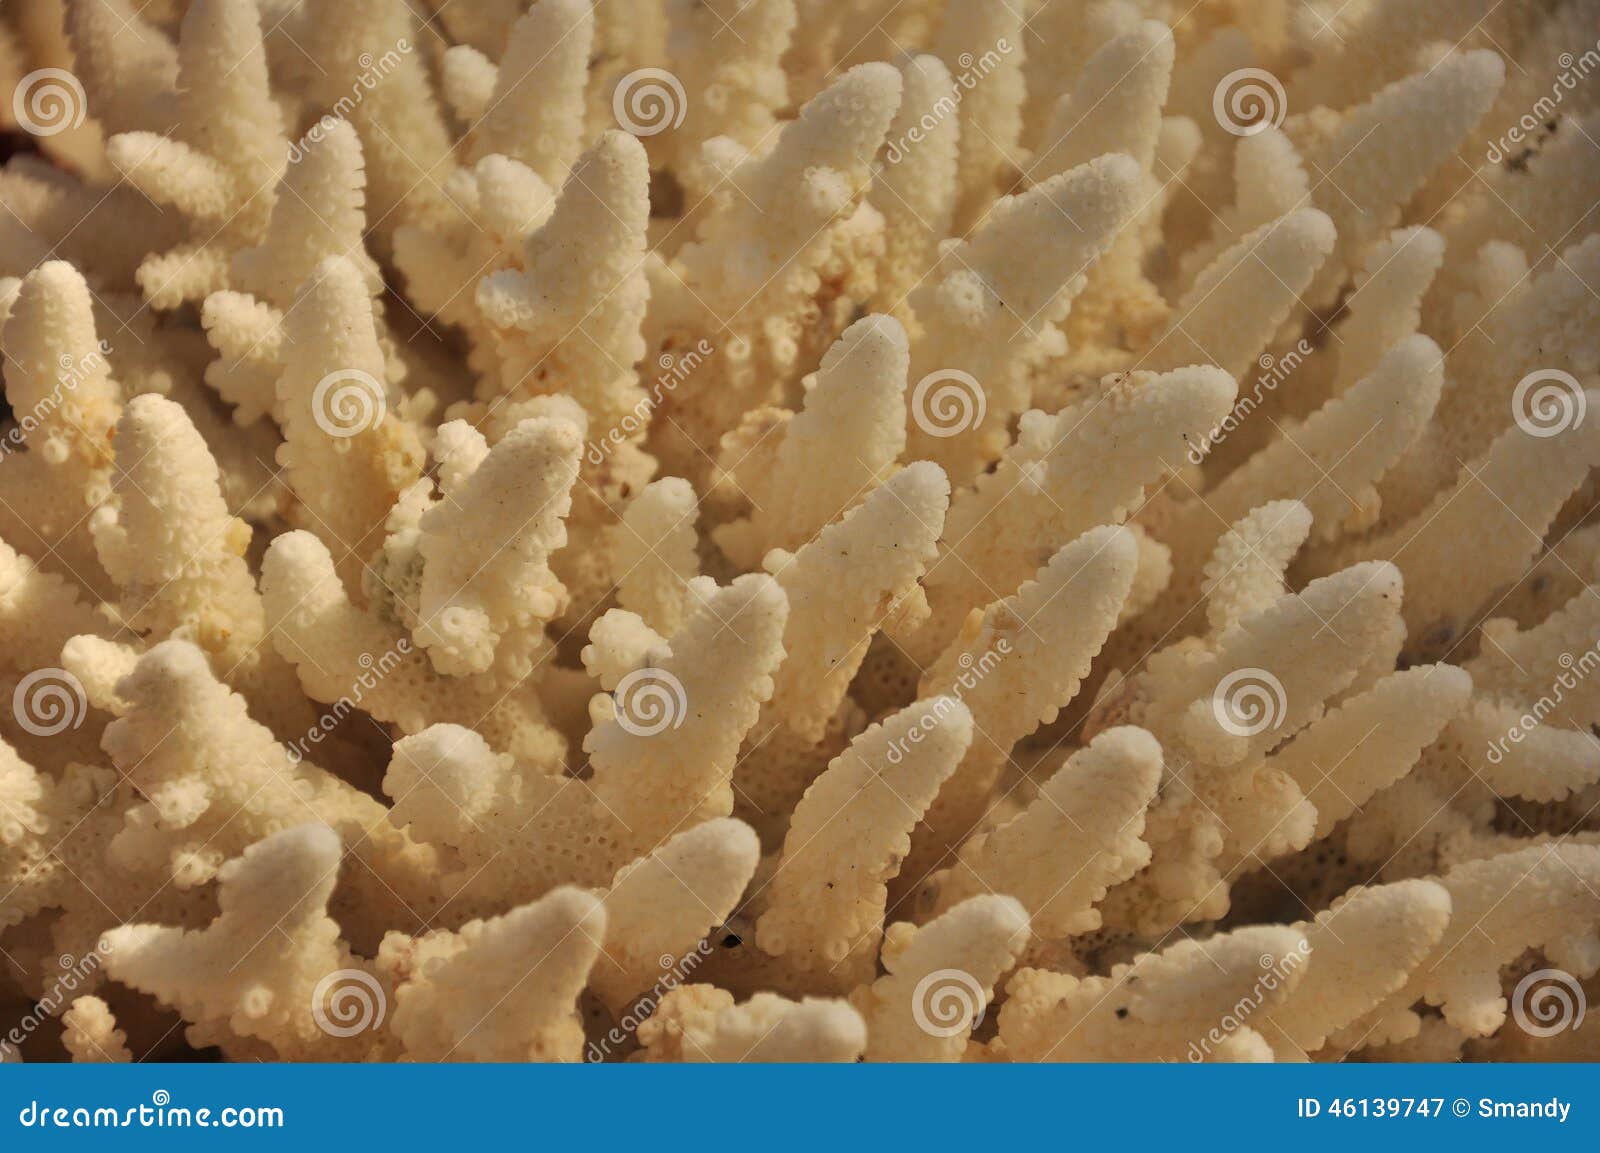 White Coral Close-up Image of Endangered Species Stock Image - Image of ...